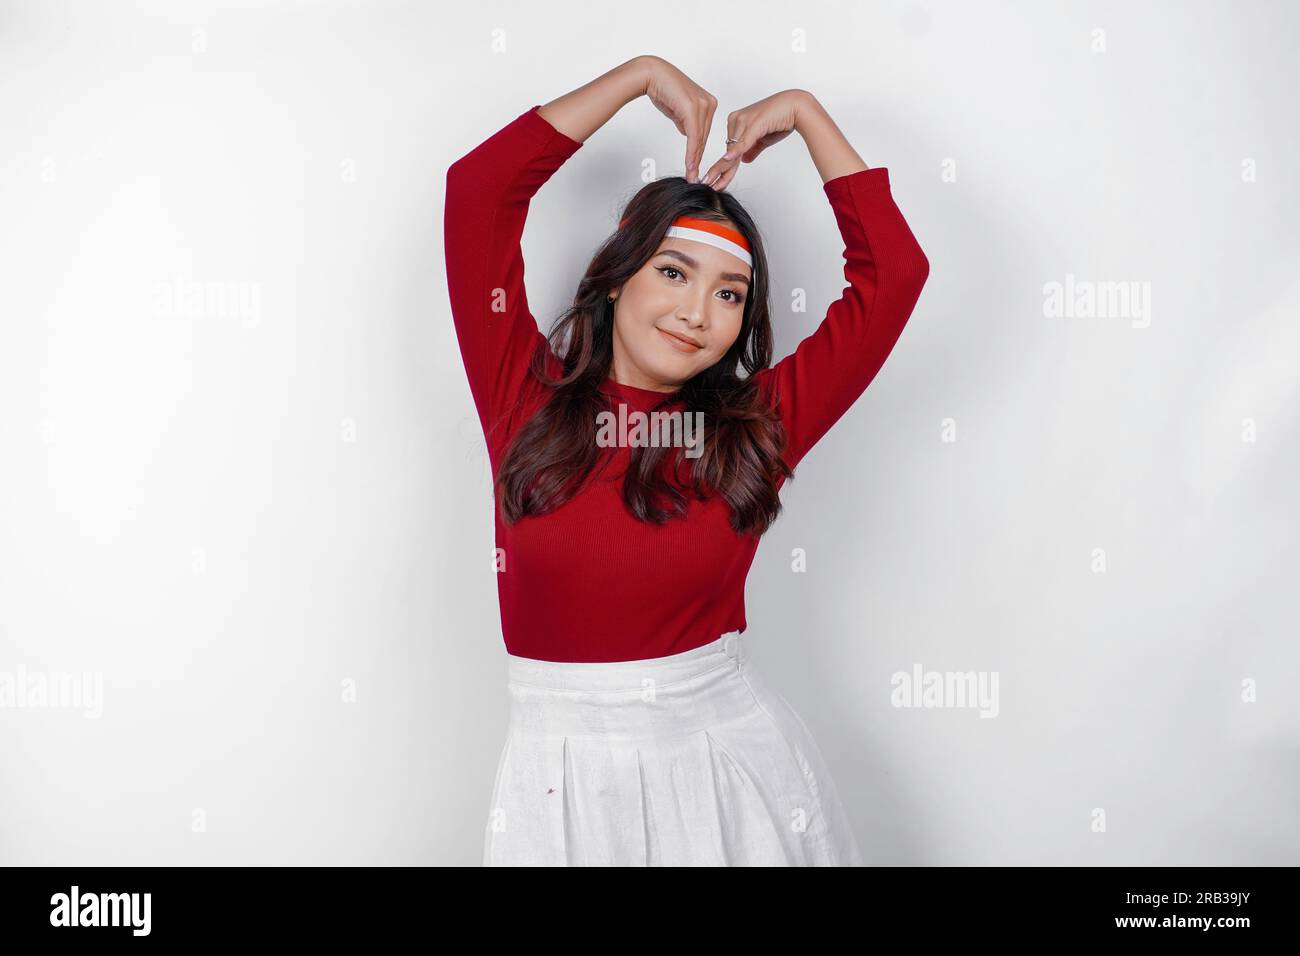 A young Asian woman wearing a red top feels nationalism, shapes heart gesture expresses her love for Indonesia. Indonesia's independence day concept. Stock Photo